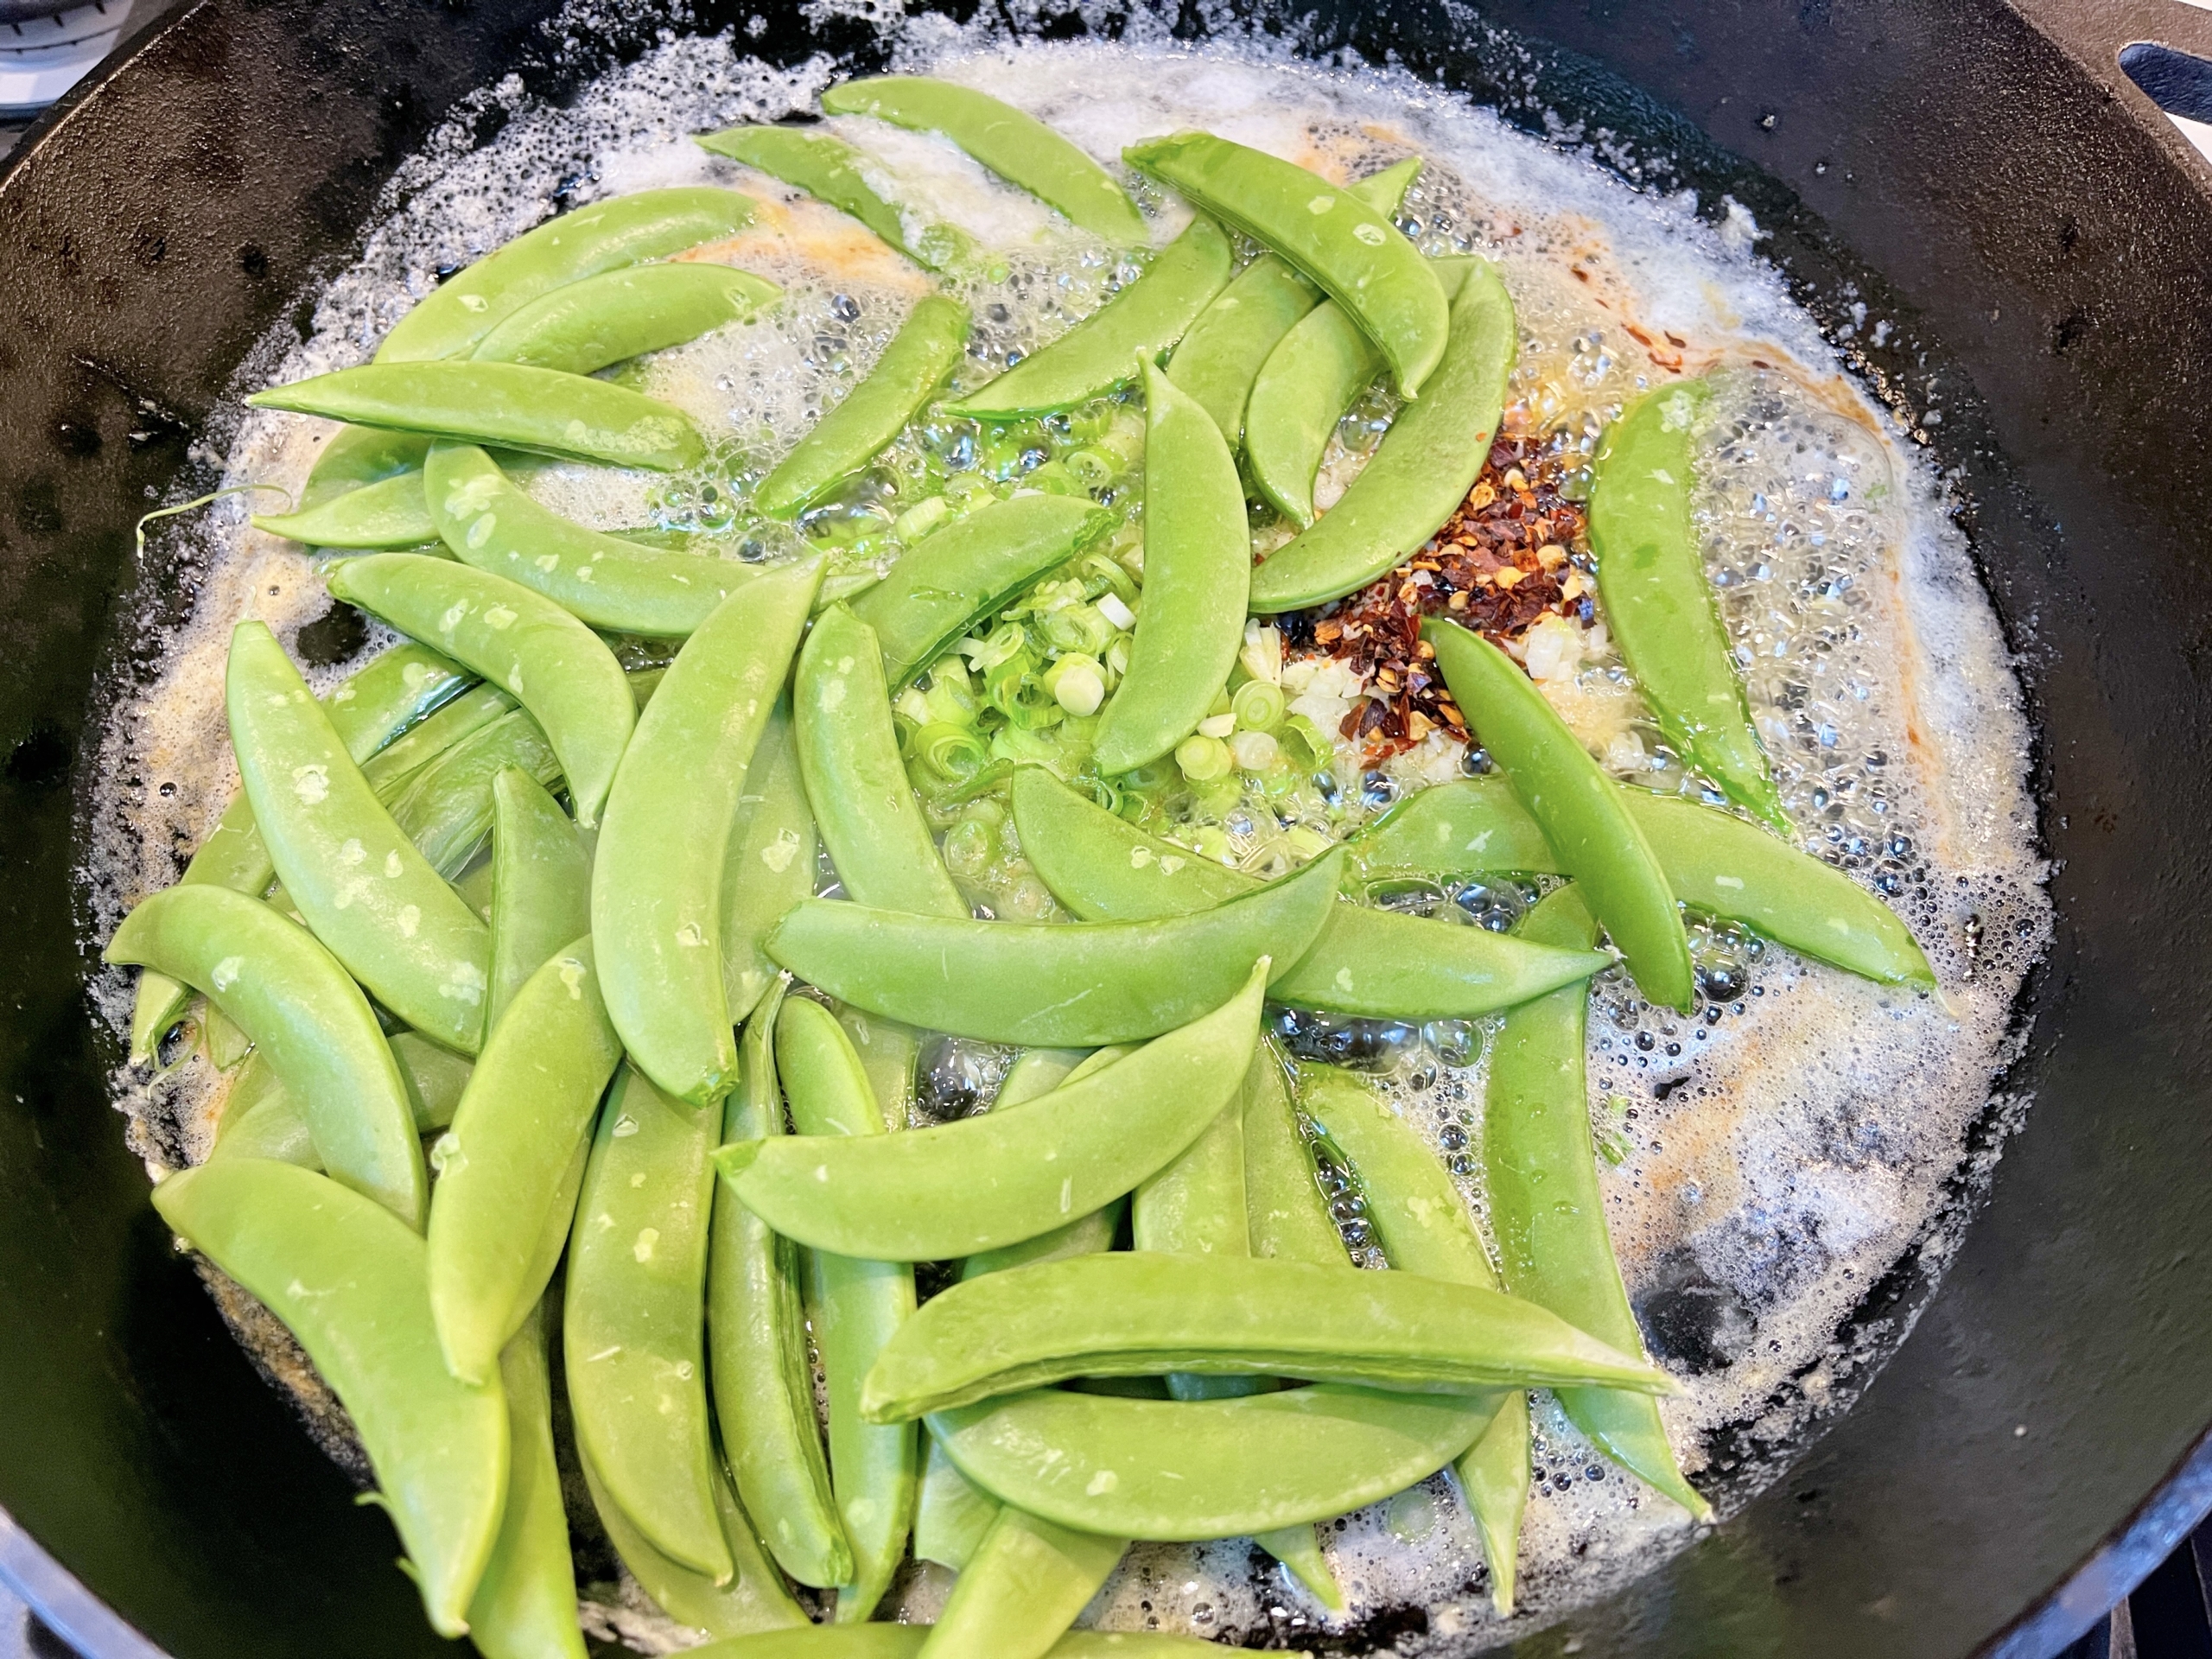 then add snow peas, white and pale green parts of the scallion, garlic and hot pepper flakes